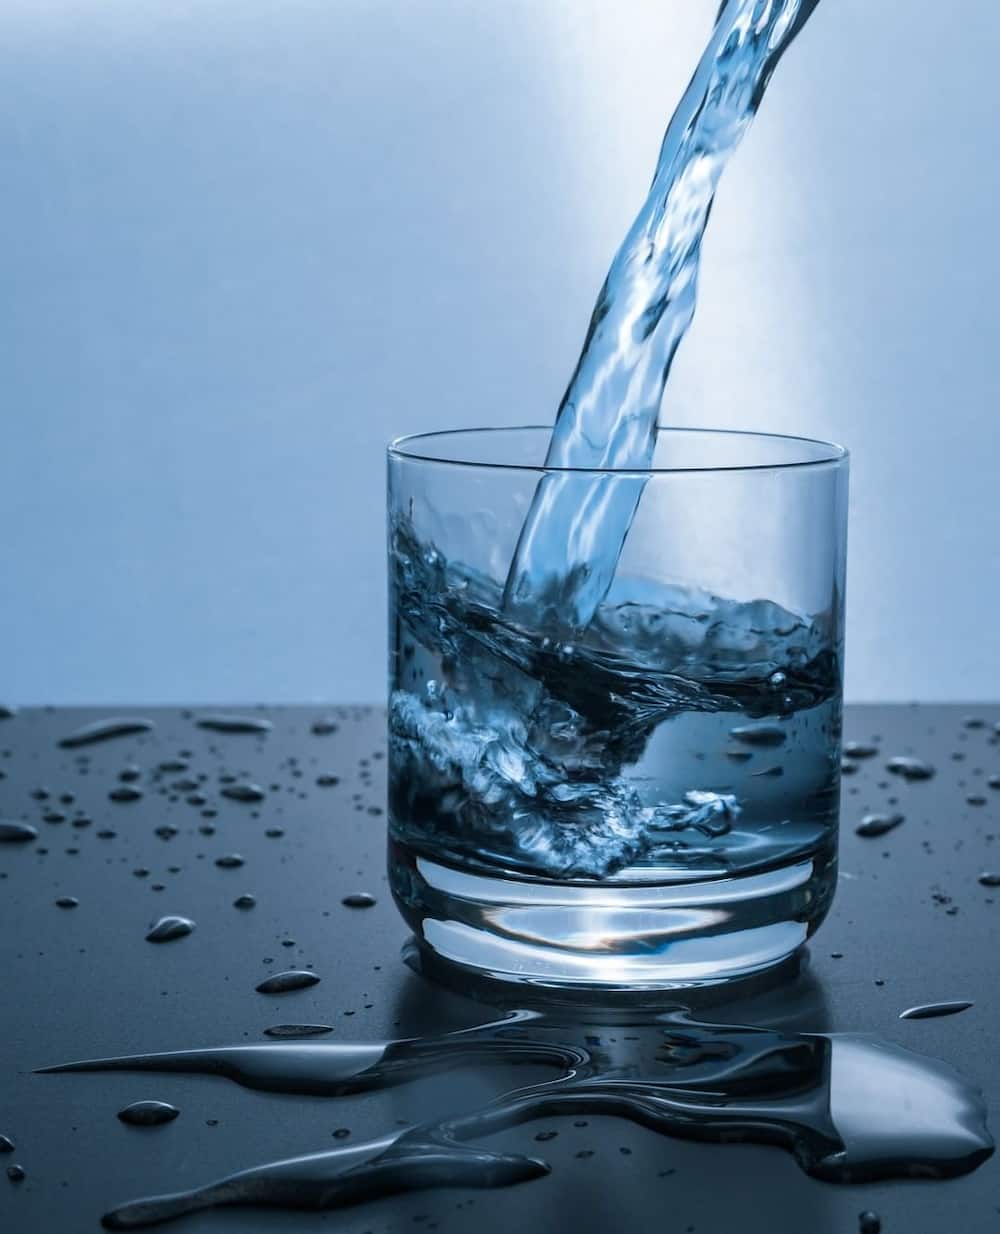 How to start a water purification business in south africa